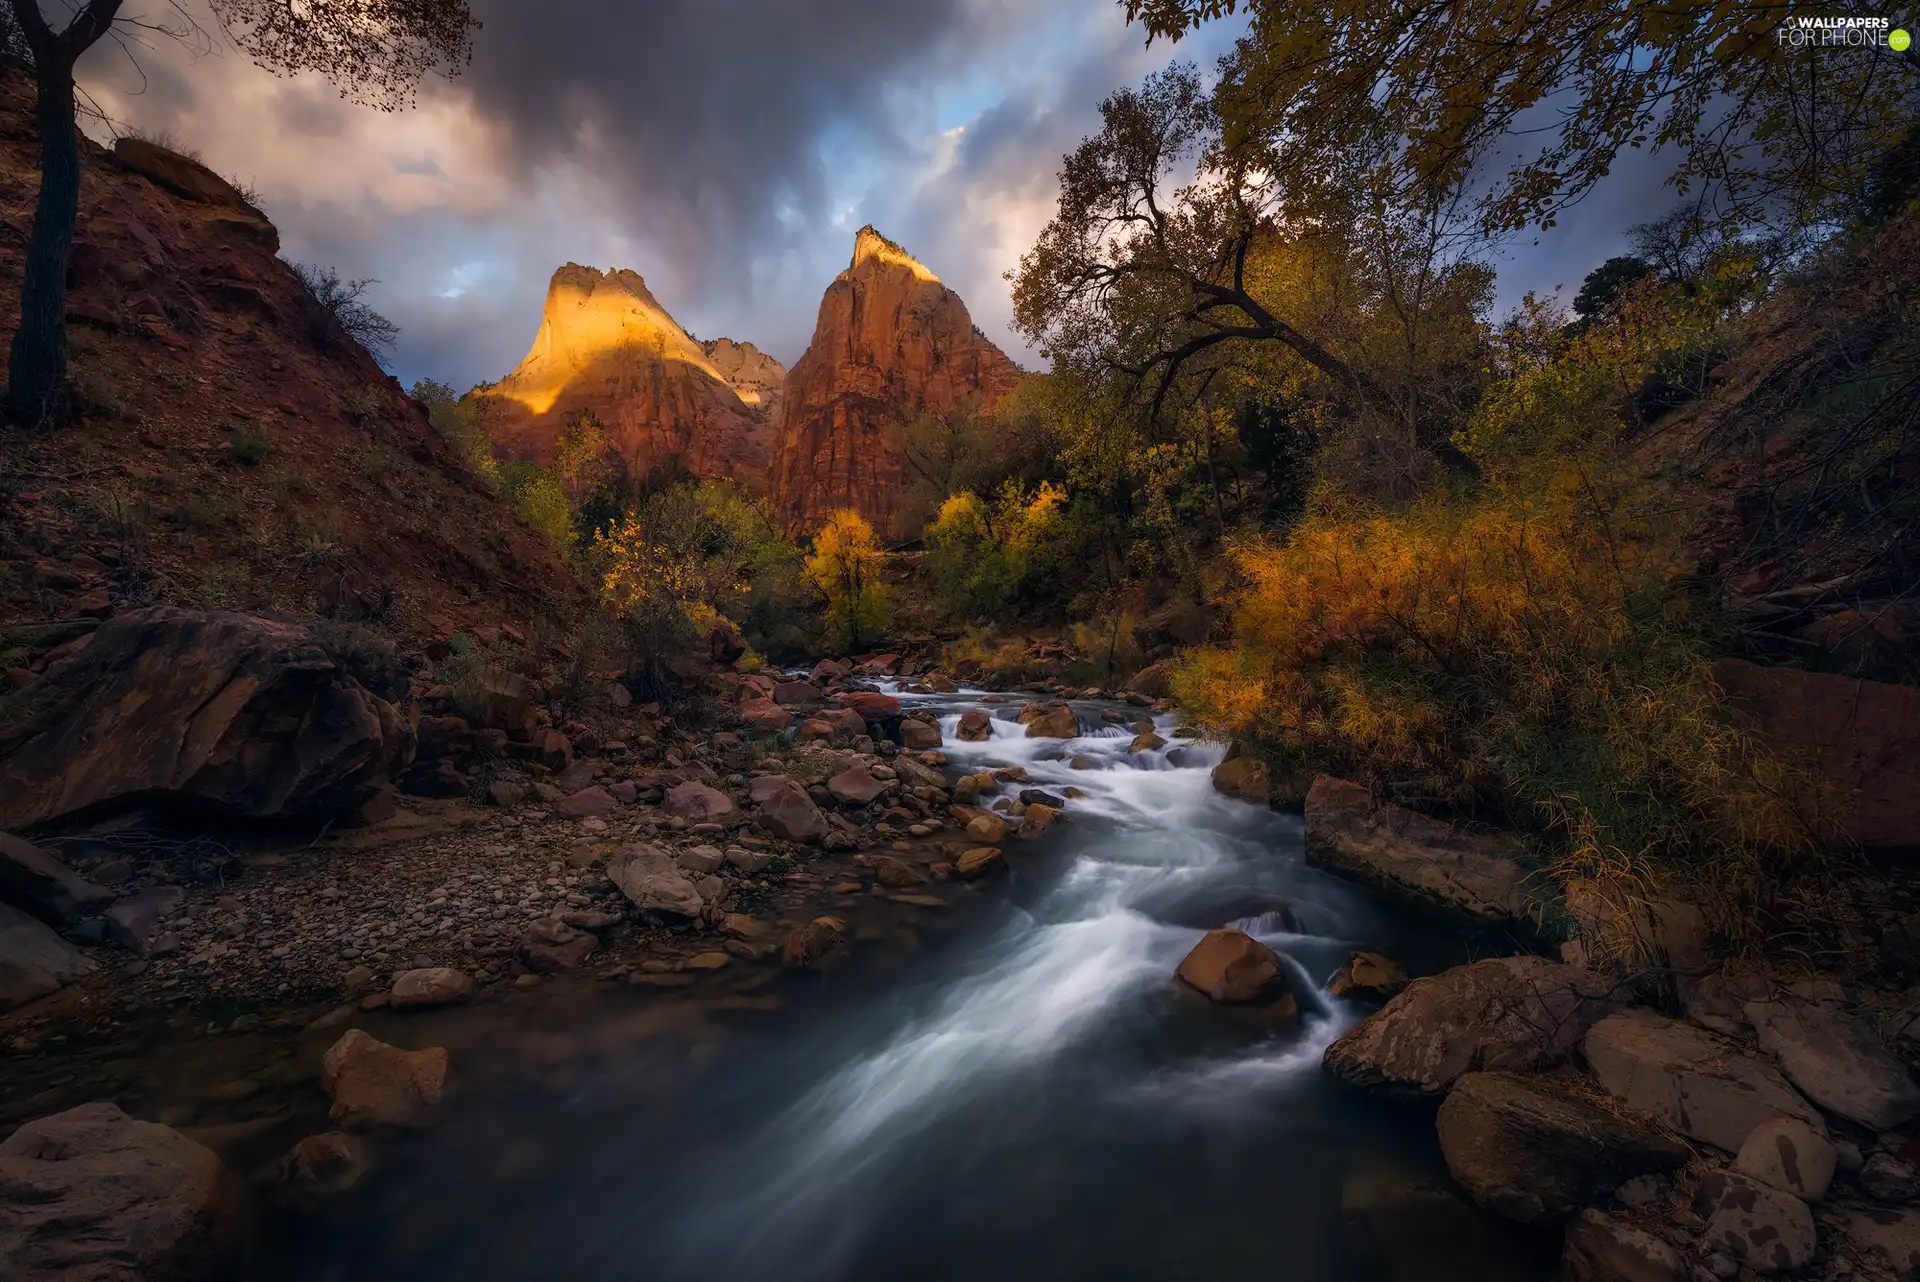 Zion National Park, The United States, rocks, Virgin River, Mountains, Utah State